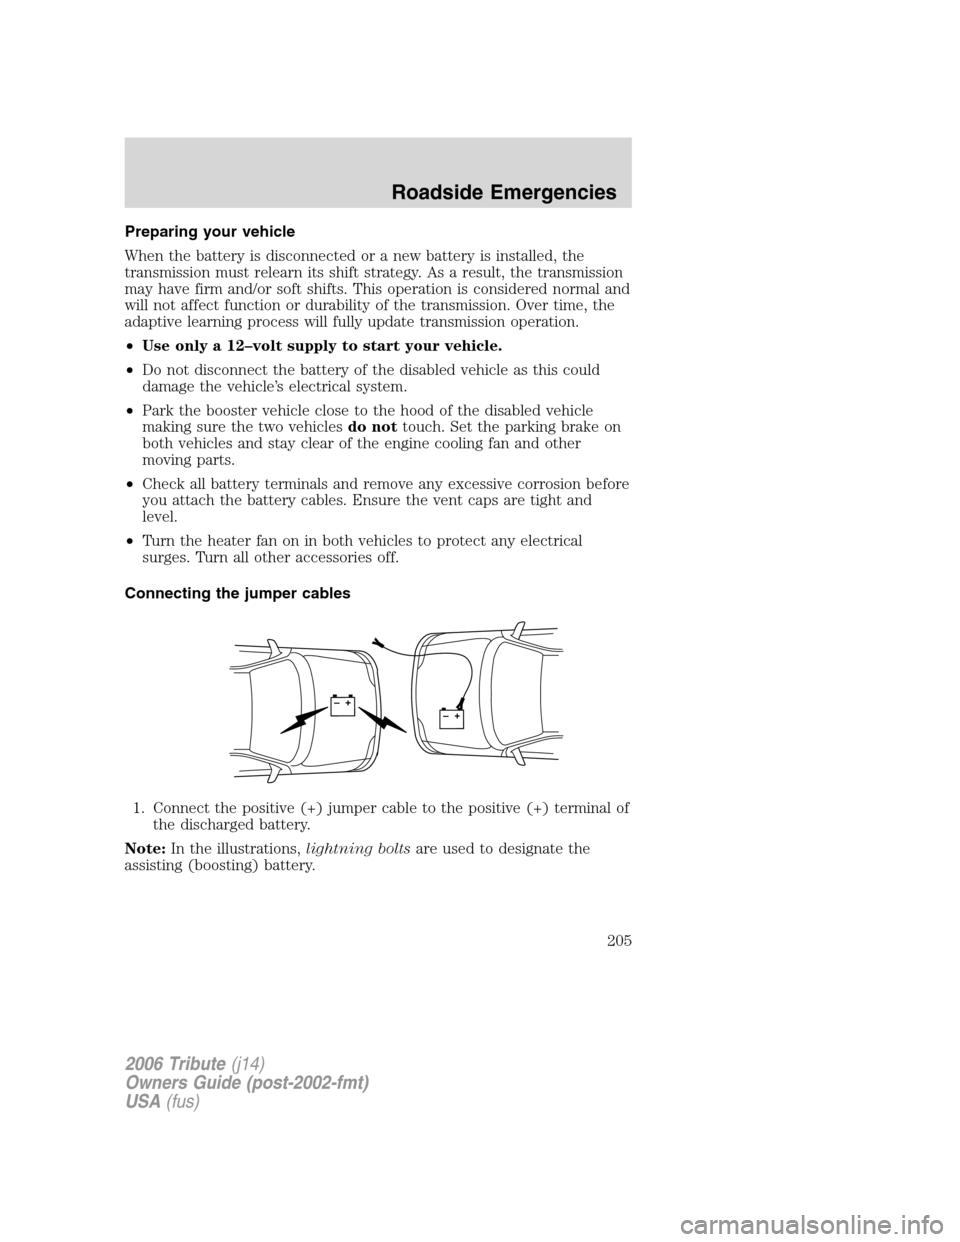 MAZDA MODEL TRIBUTE 2006  Owners Manual (in English) Preparing your vehicle
When the battery is disconnected or a new battery is installed, the
transmission must relearn its shift strategy. As a result, the transmission
may have firm and/or soft shifts.